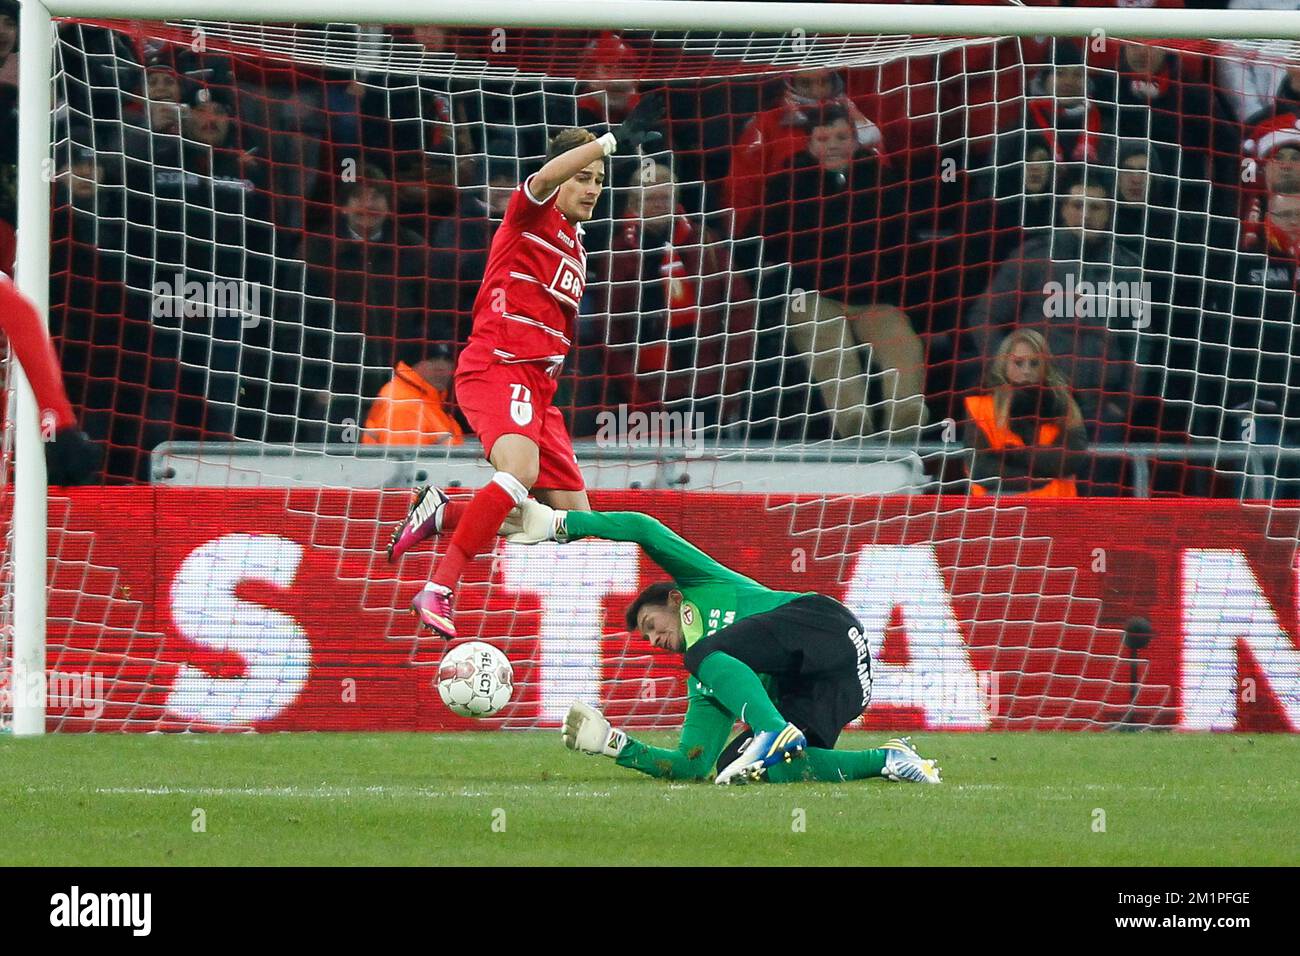 20130125 - LIEGE, BELGIUM: Standard's Maor Bar Buzaglo and Kortrijk's goalkeeper Darren Keet fight for the ball during the Jupiler Pro League match between Standard de Liege and KV Kortrijk, in Liege, Friday 25 January 2013, on day 24 of the Belgian soccer championship. BELGA PHOTO BRUNO FAHY Stock Photo